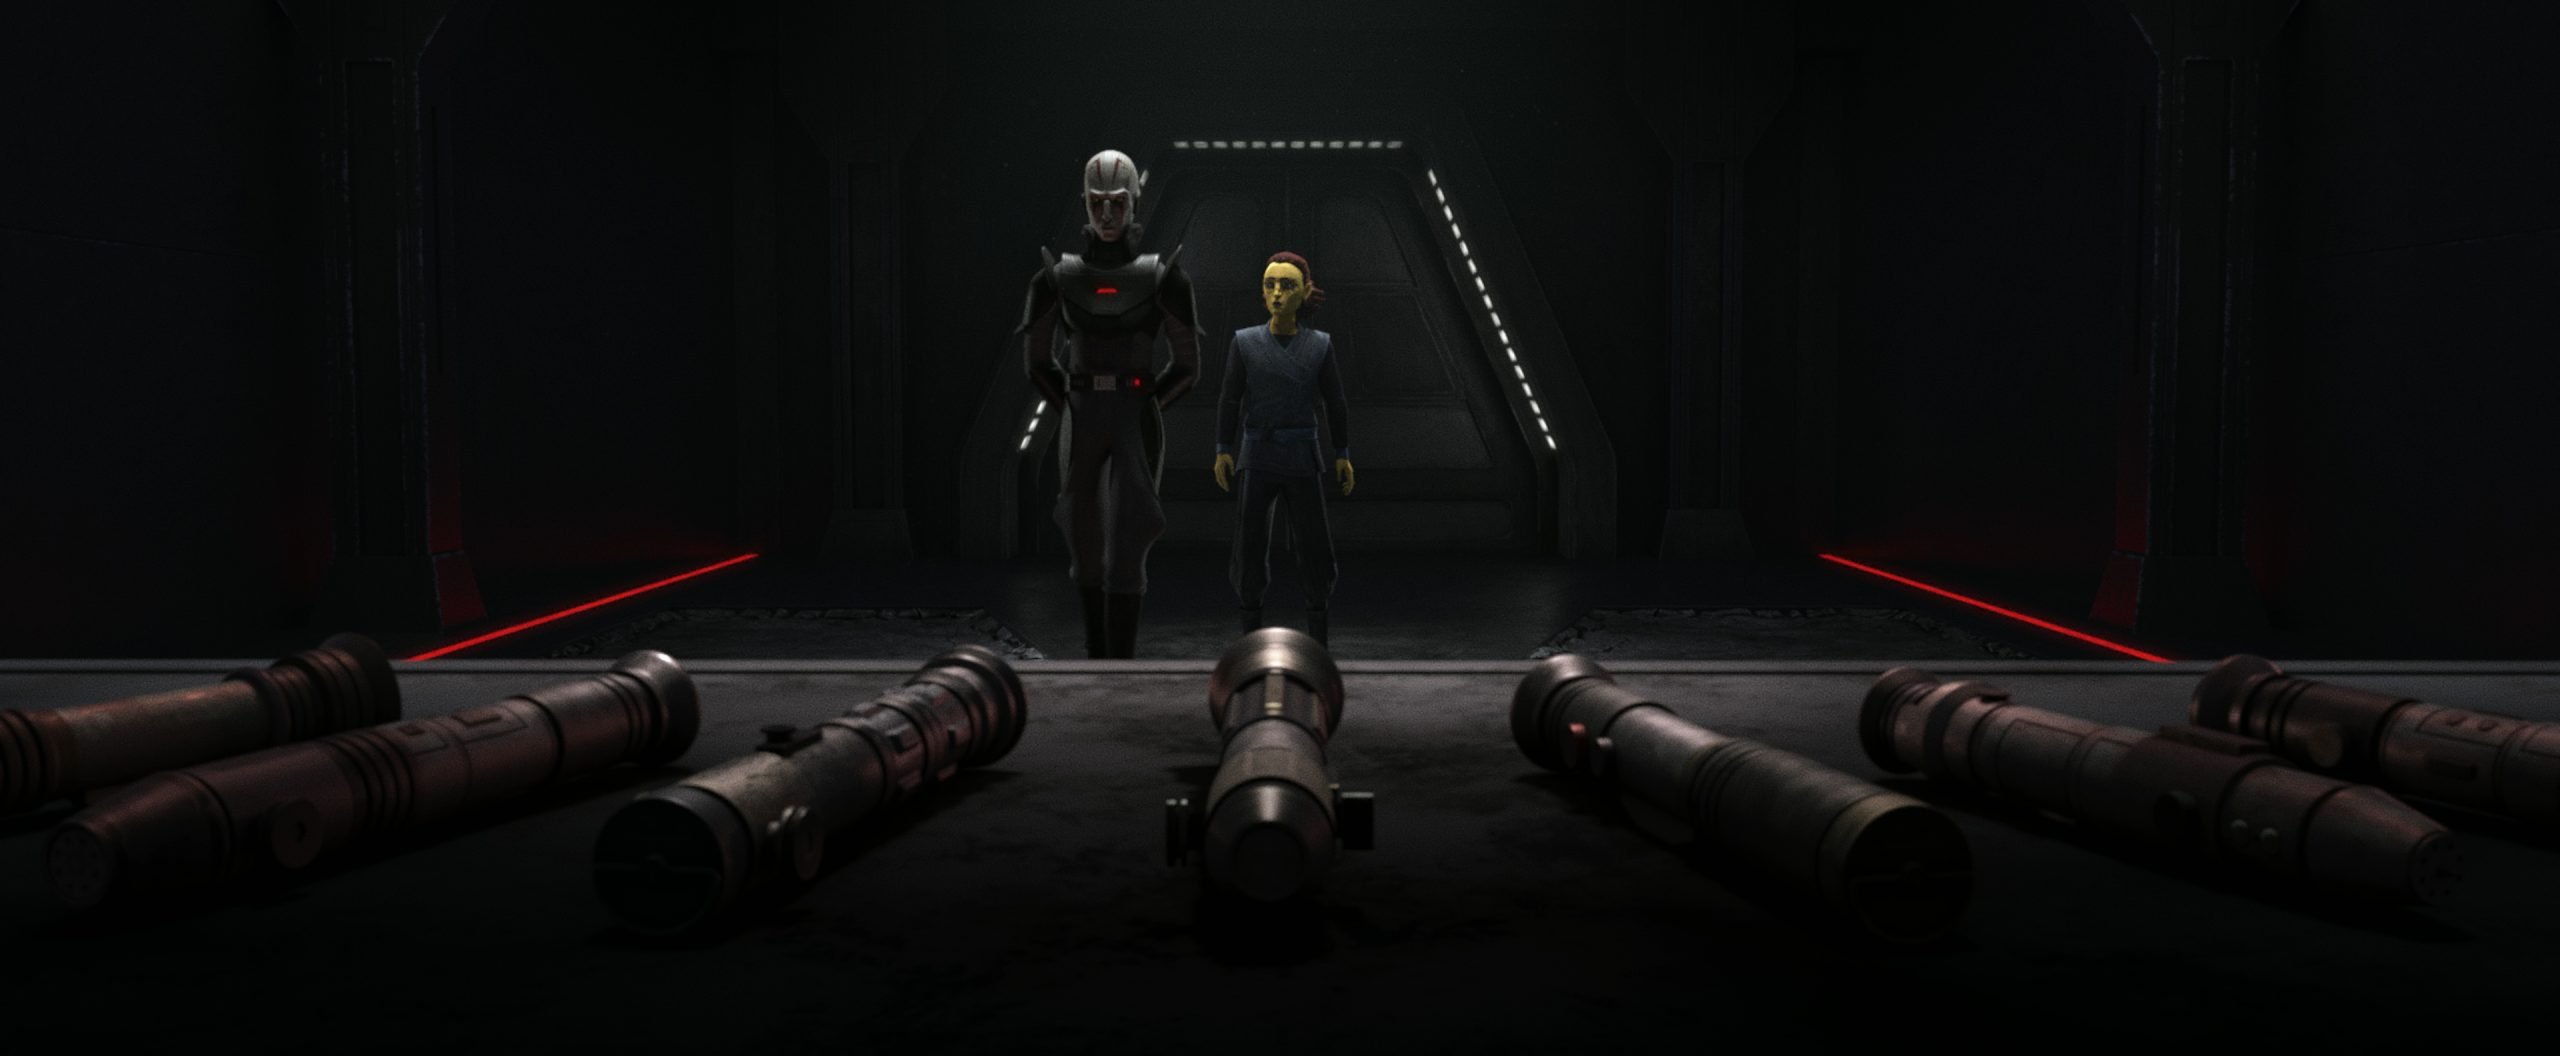 Barriss Offee with the Grand Inquisitor in Tales of the Empire